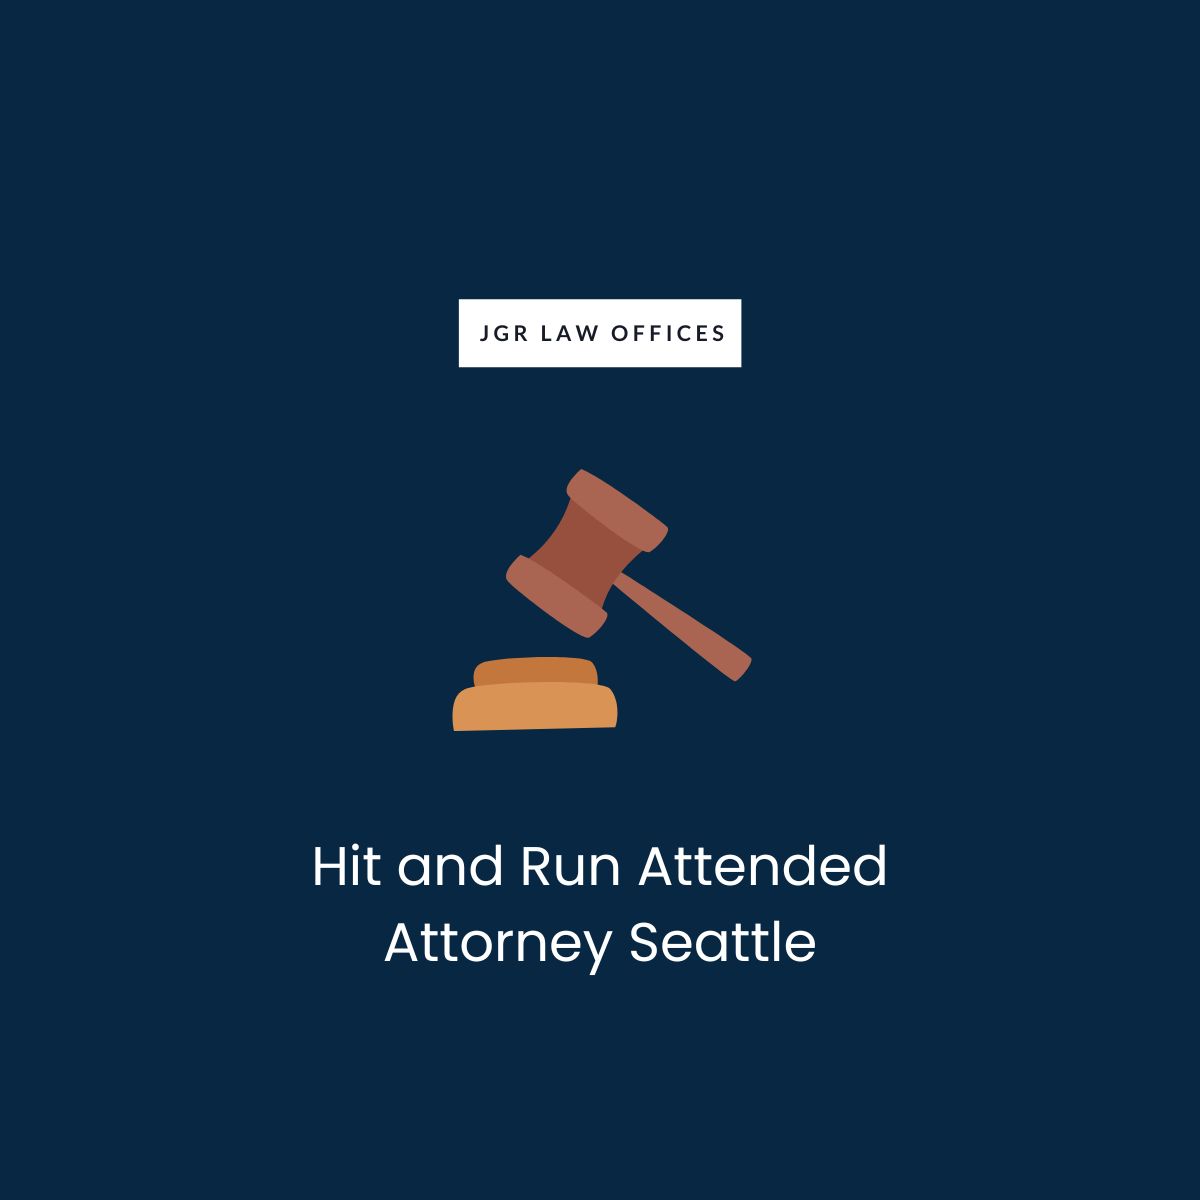 Hit and Run Attended Attorney Seattle